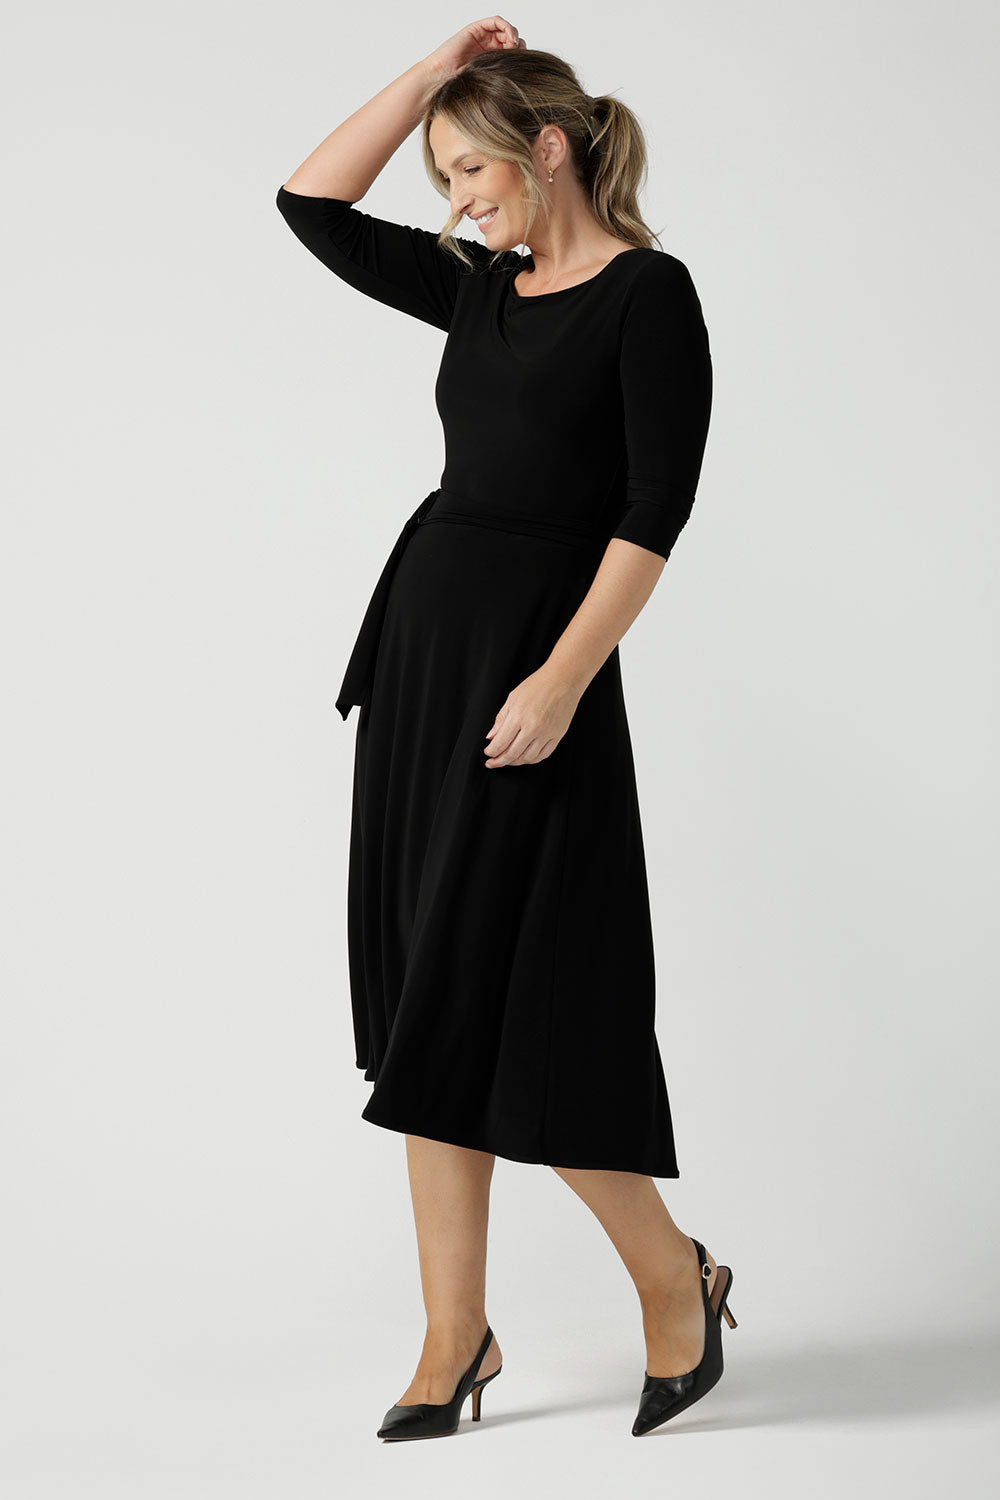 Size 10 woman wears the Melissa dress in black, a belted style with pockets and 3/4 sleeve with rounded boat neckline. Petite to plus size fashion made in Australia for women size 8 - 24.